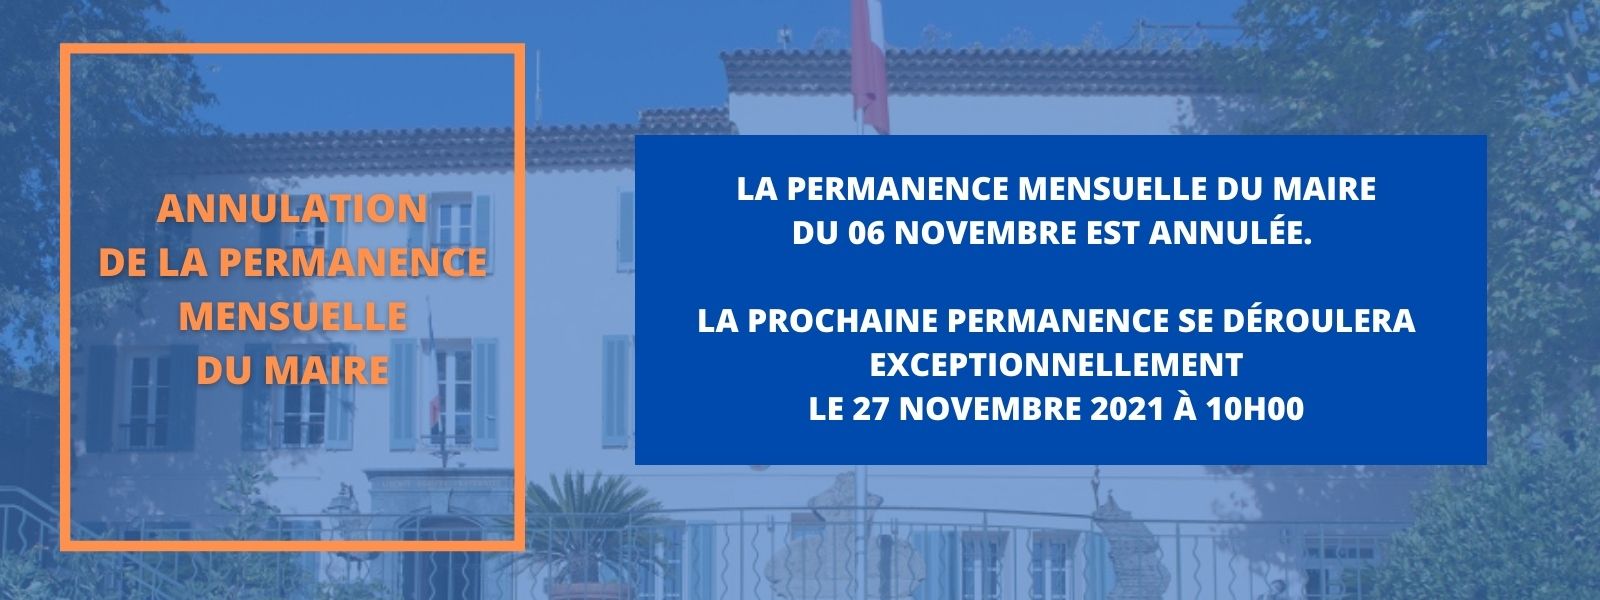 Saturday 06 November 2021: cancellation of the mayor's monthly permanence